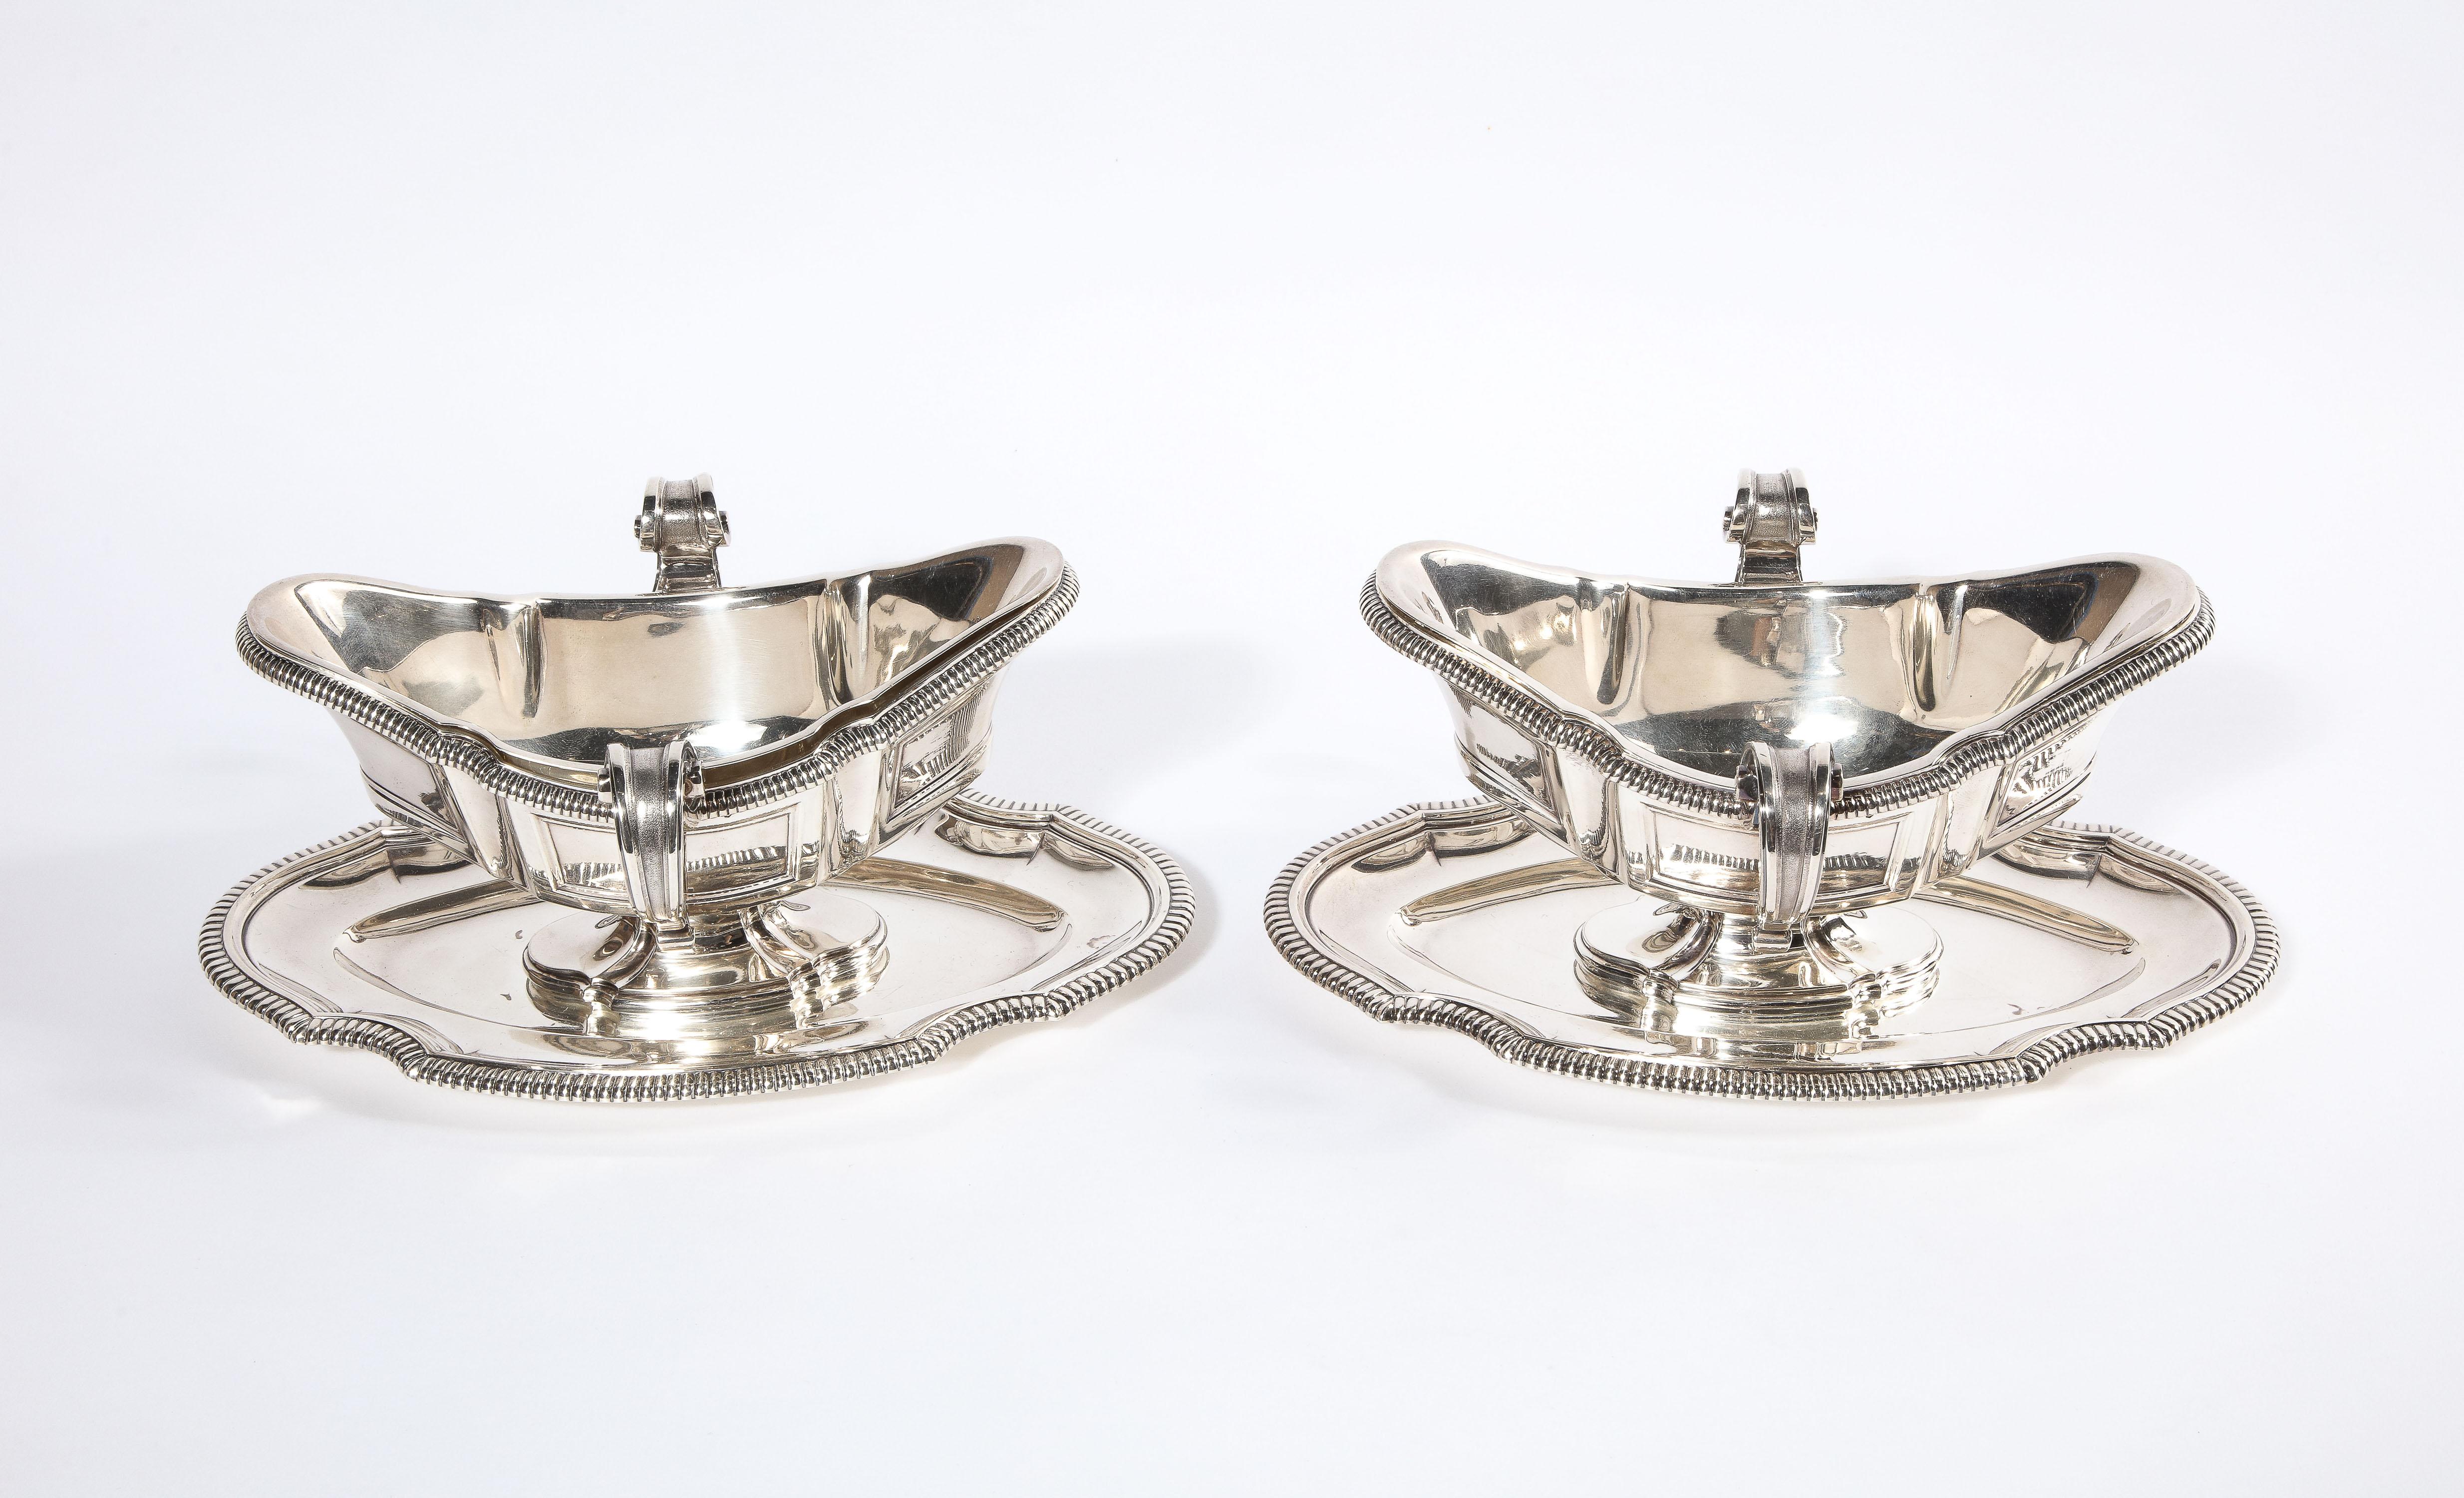 19th Century Pair of French Silver Sauceboats by Gustave Keller, Paris, circa 1880